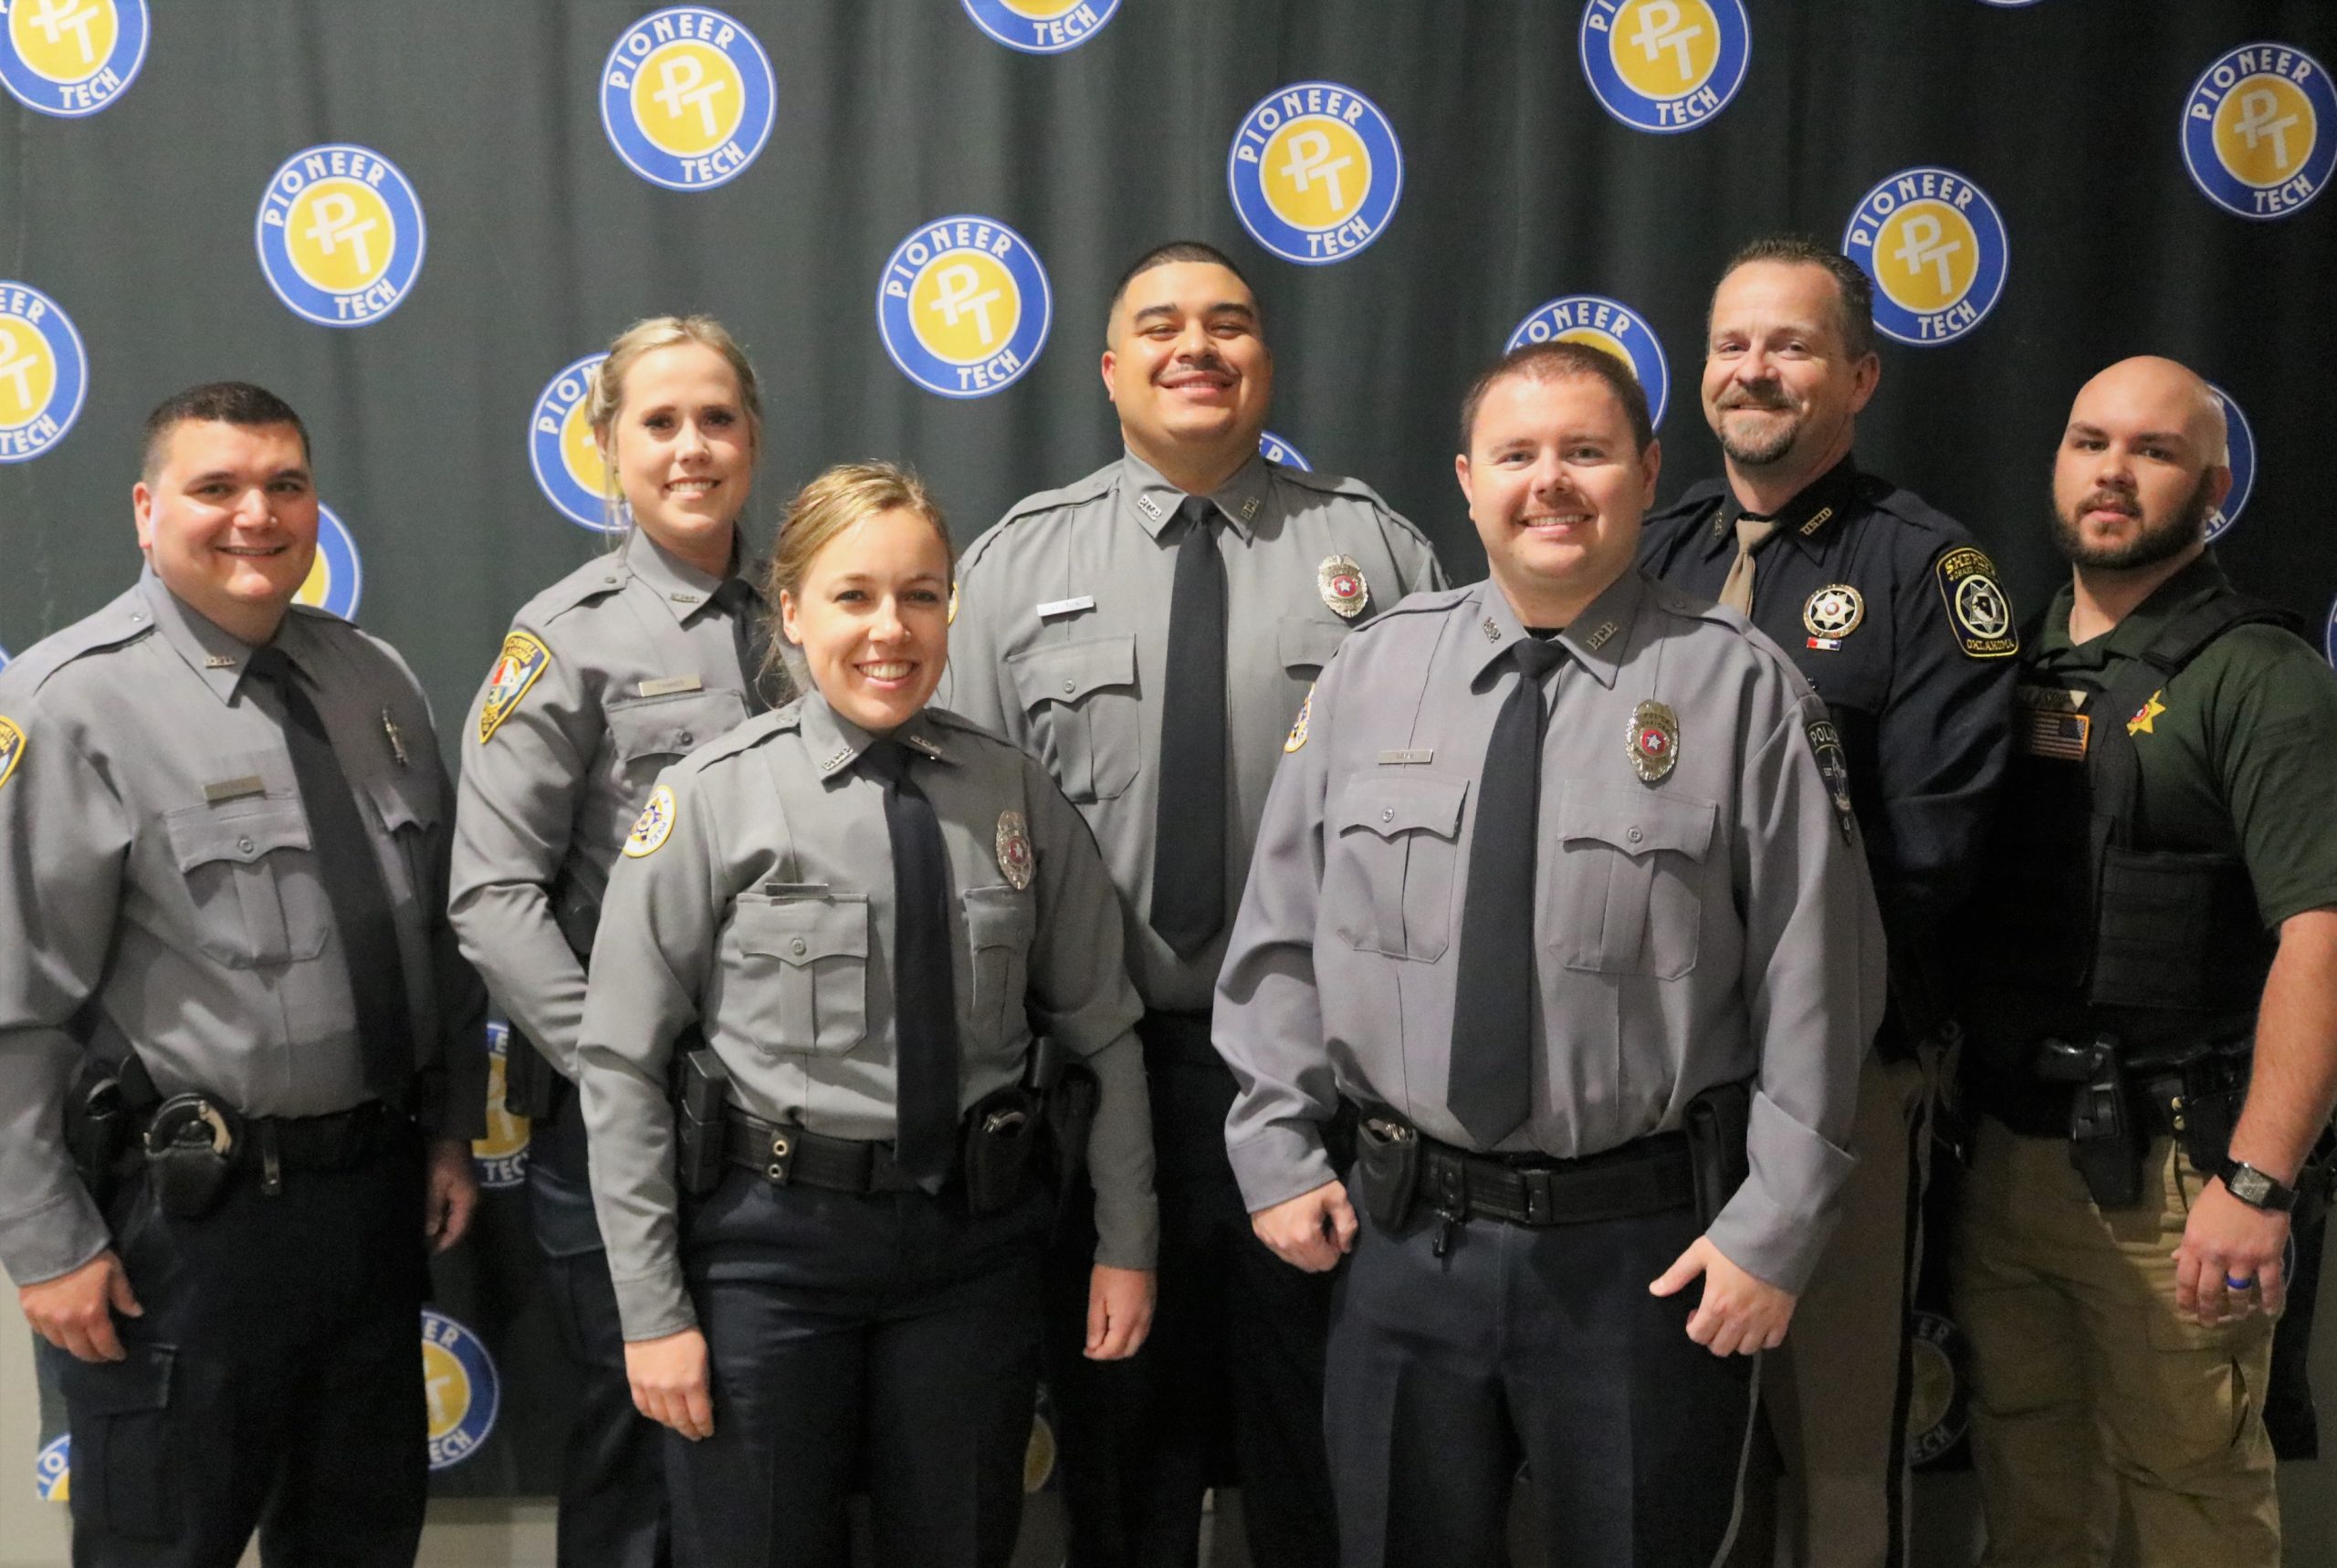 Pioneer Technology Center’s First Basic Peace Officer Certification Students Celebrate Graduation